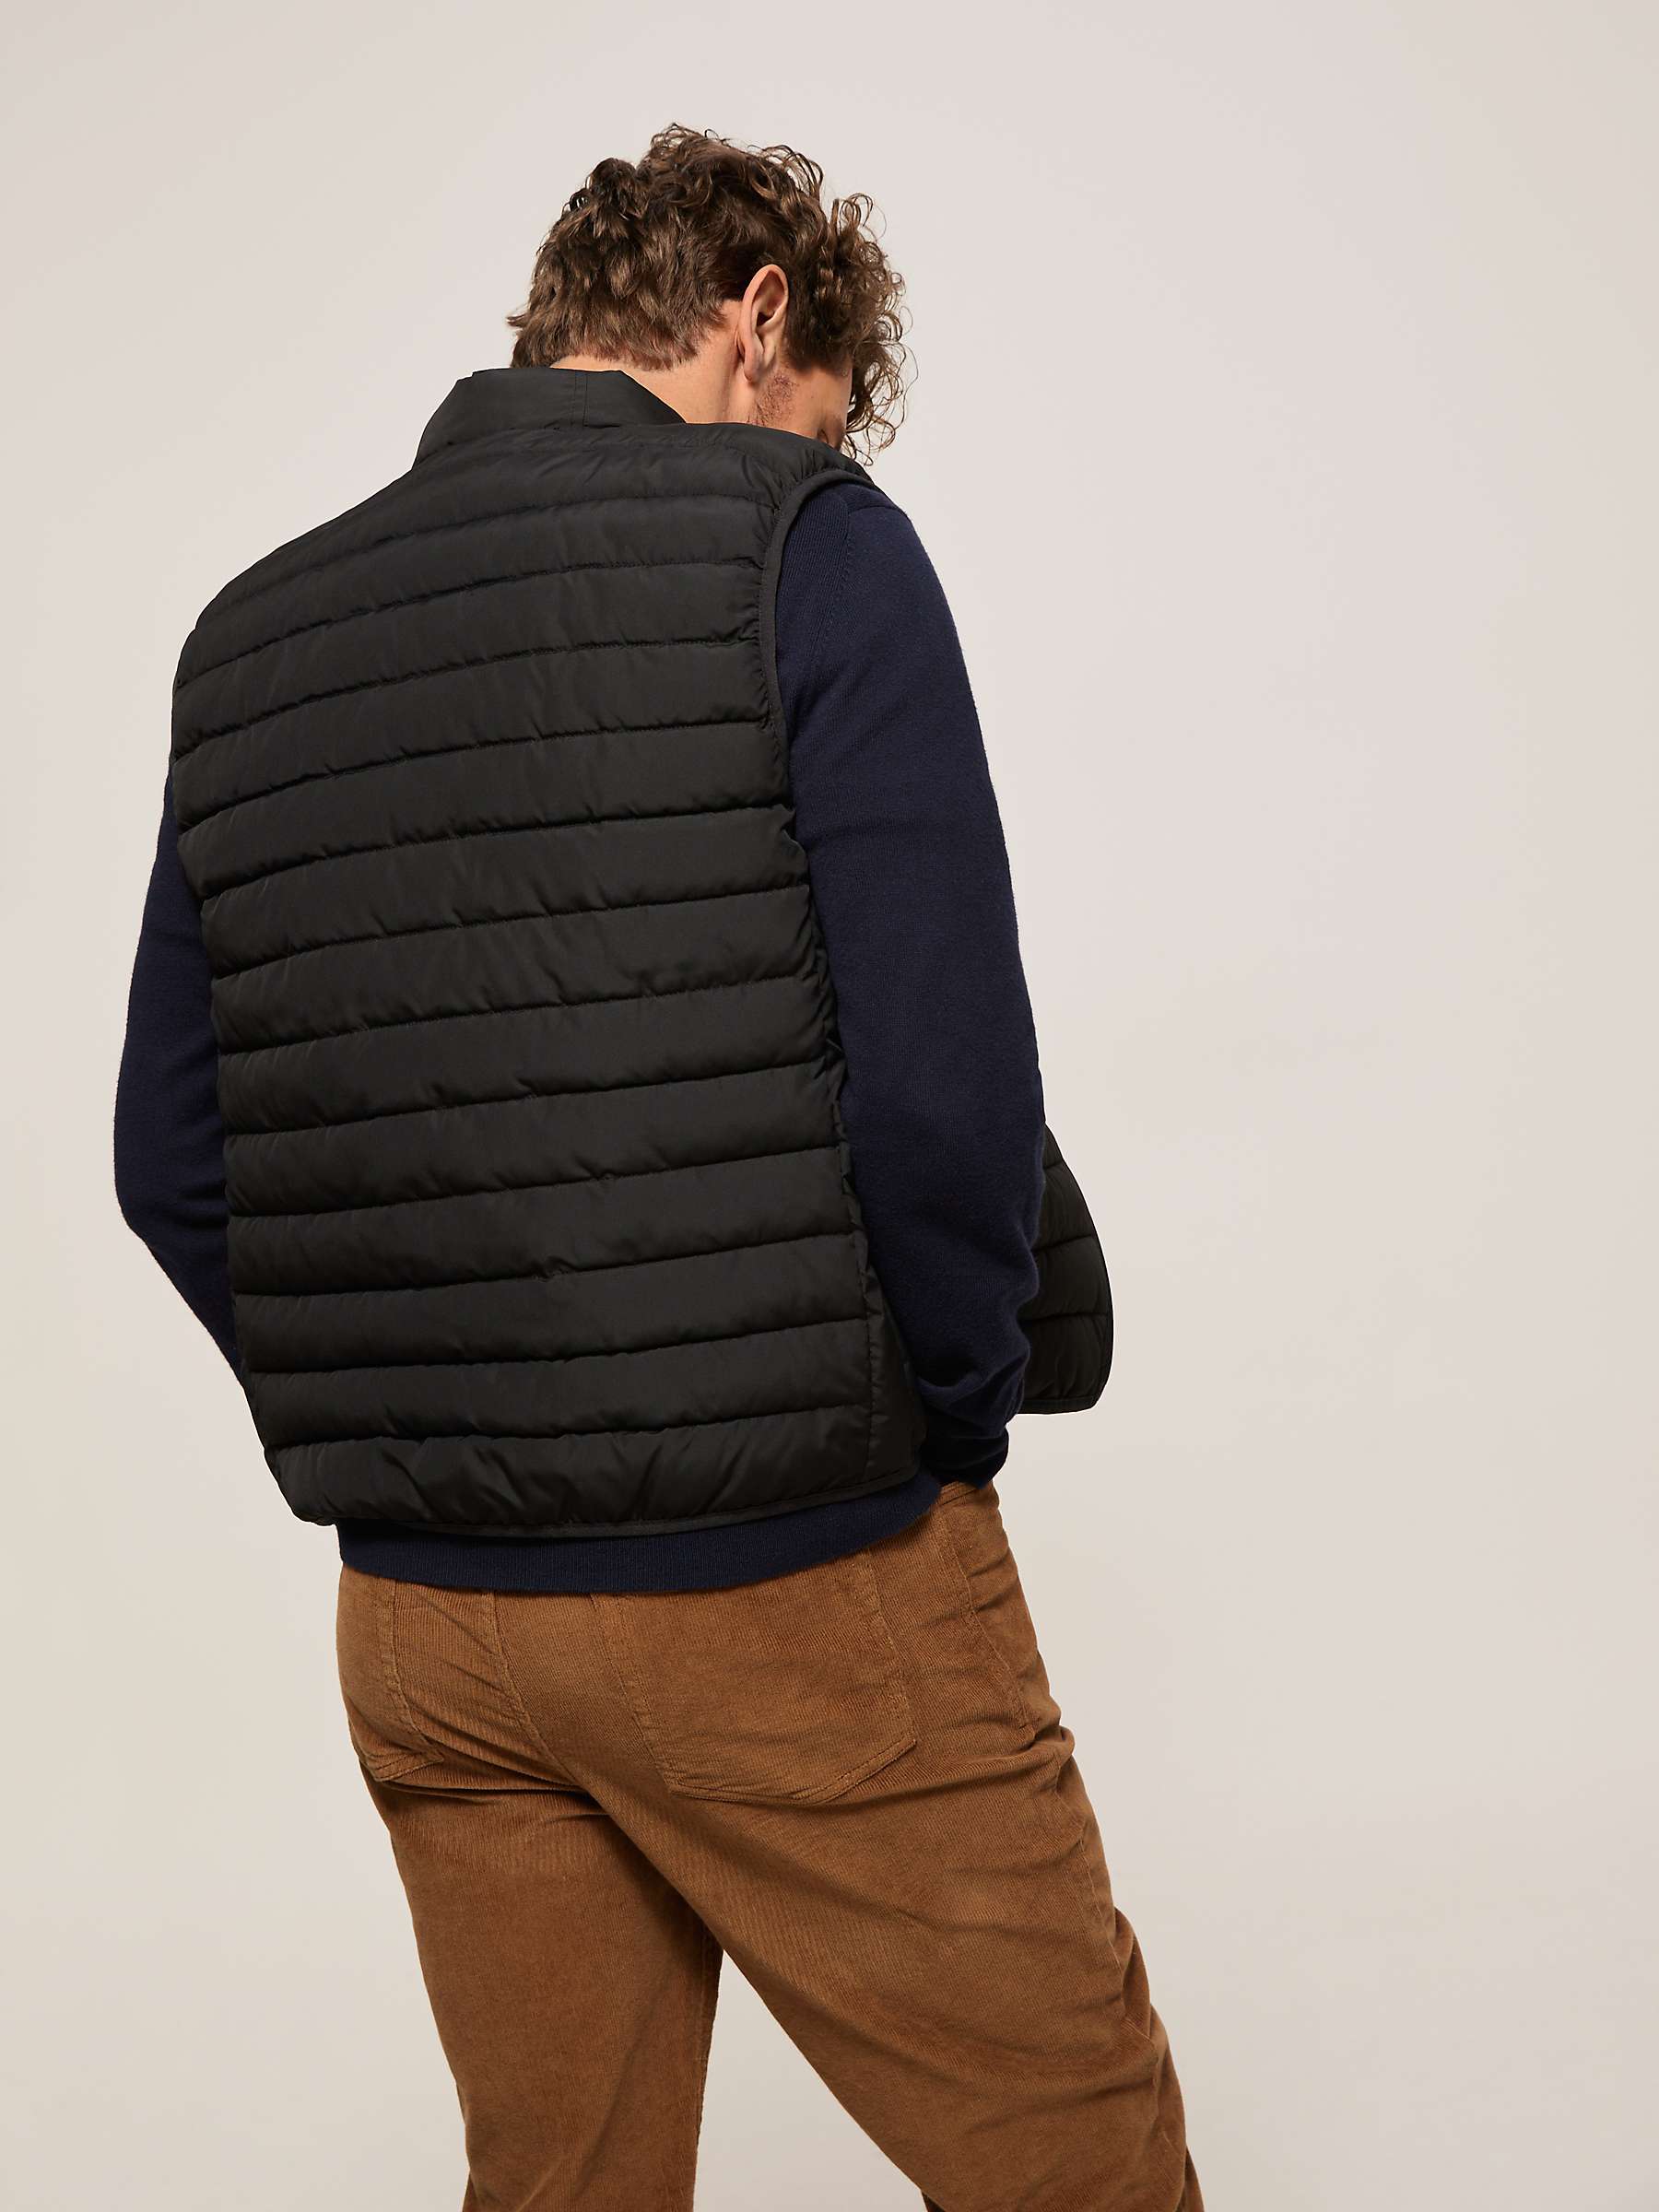 Buy John Lewis Shower Resistant Recycled Puffer Gilet Online at johnlewis.com